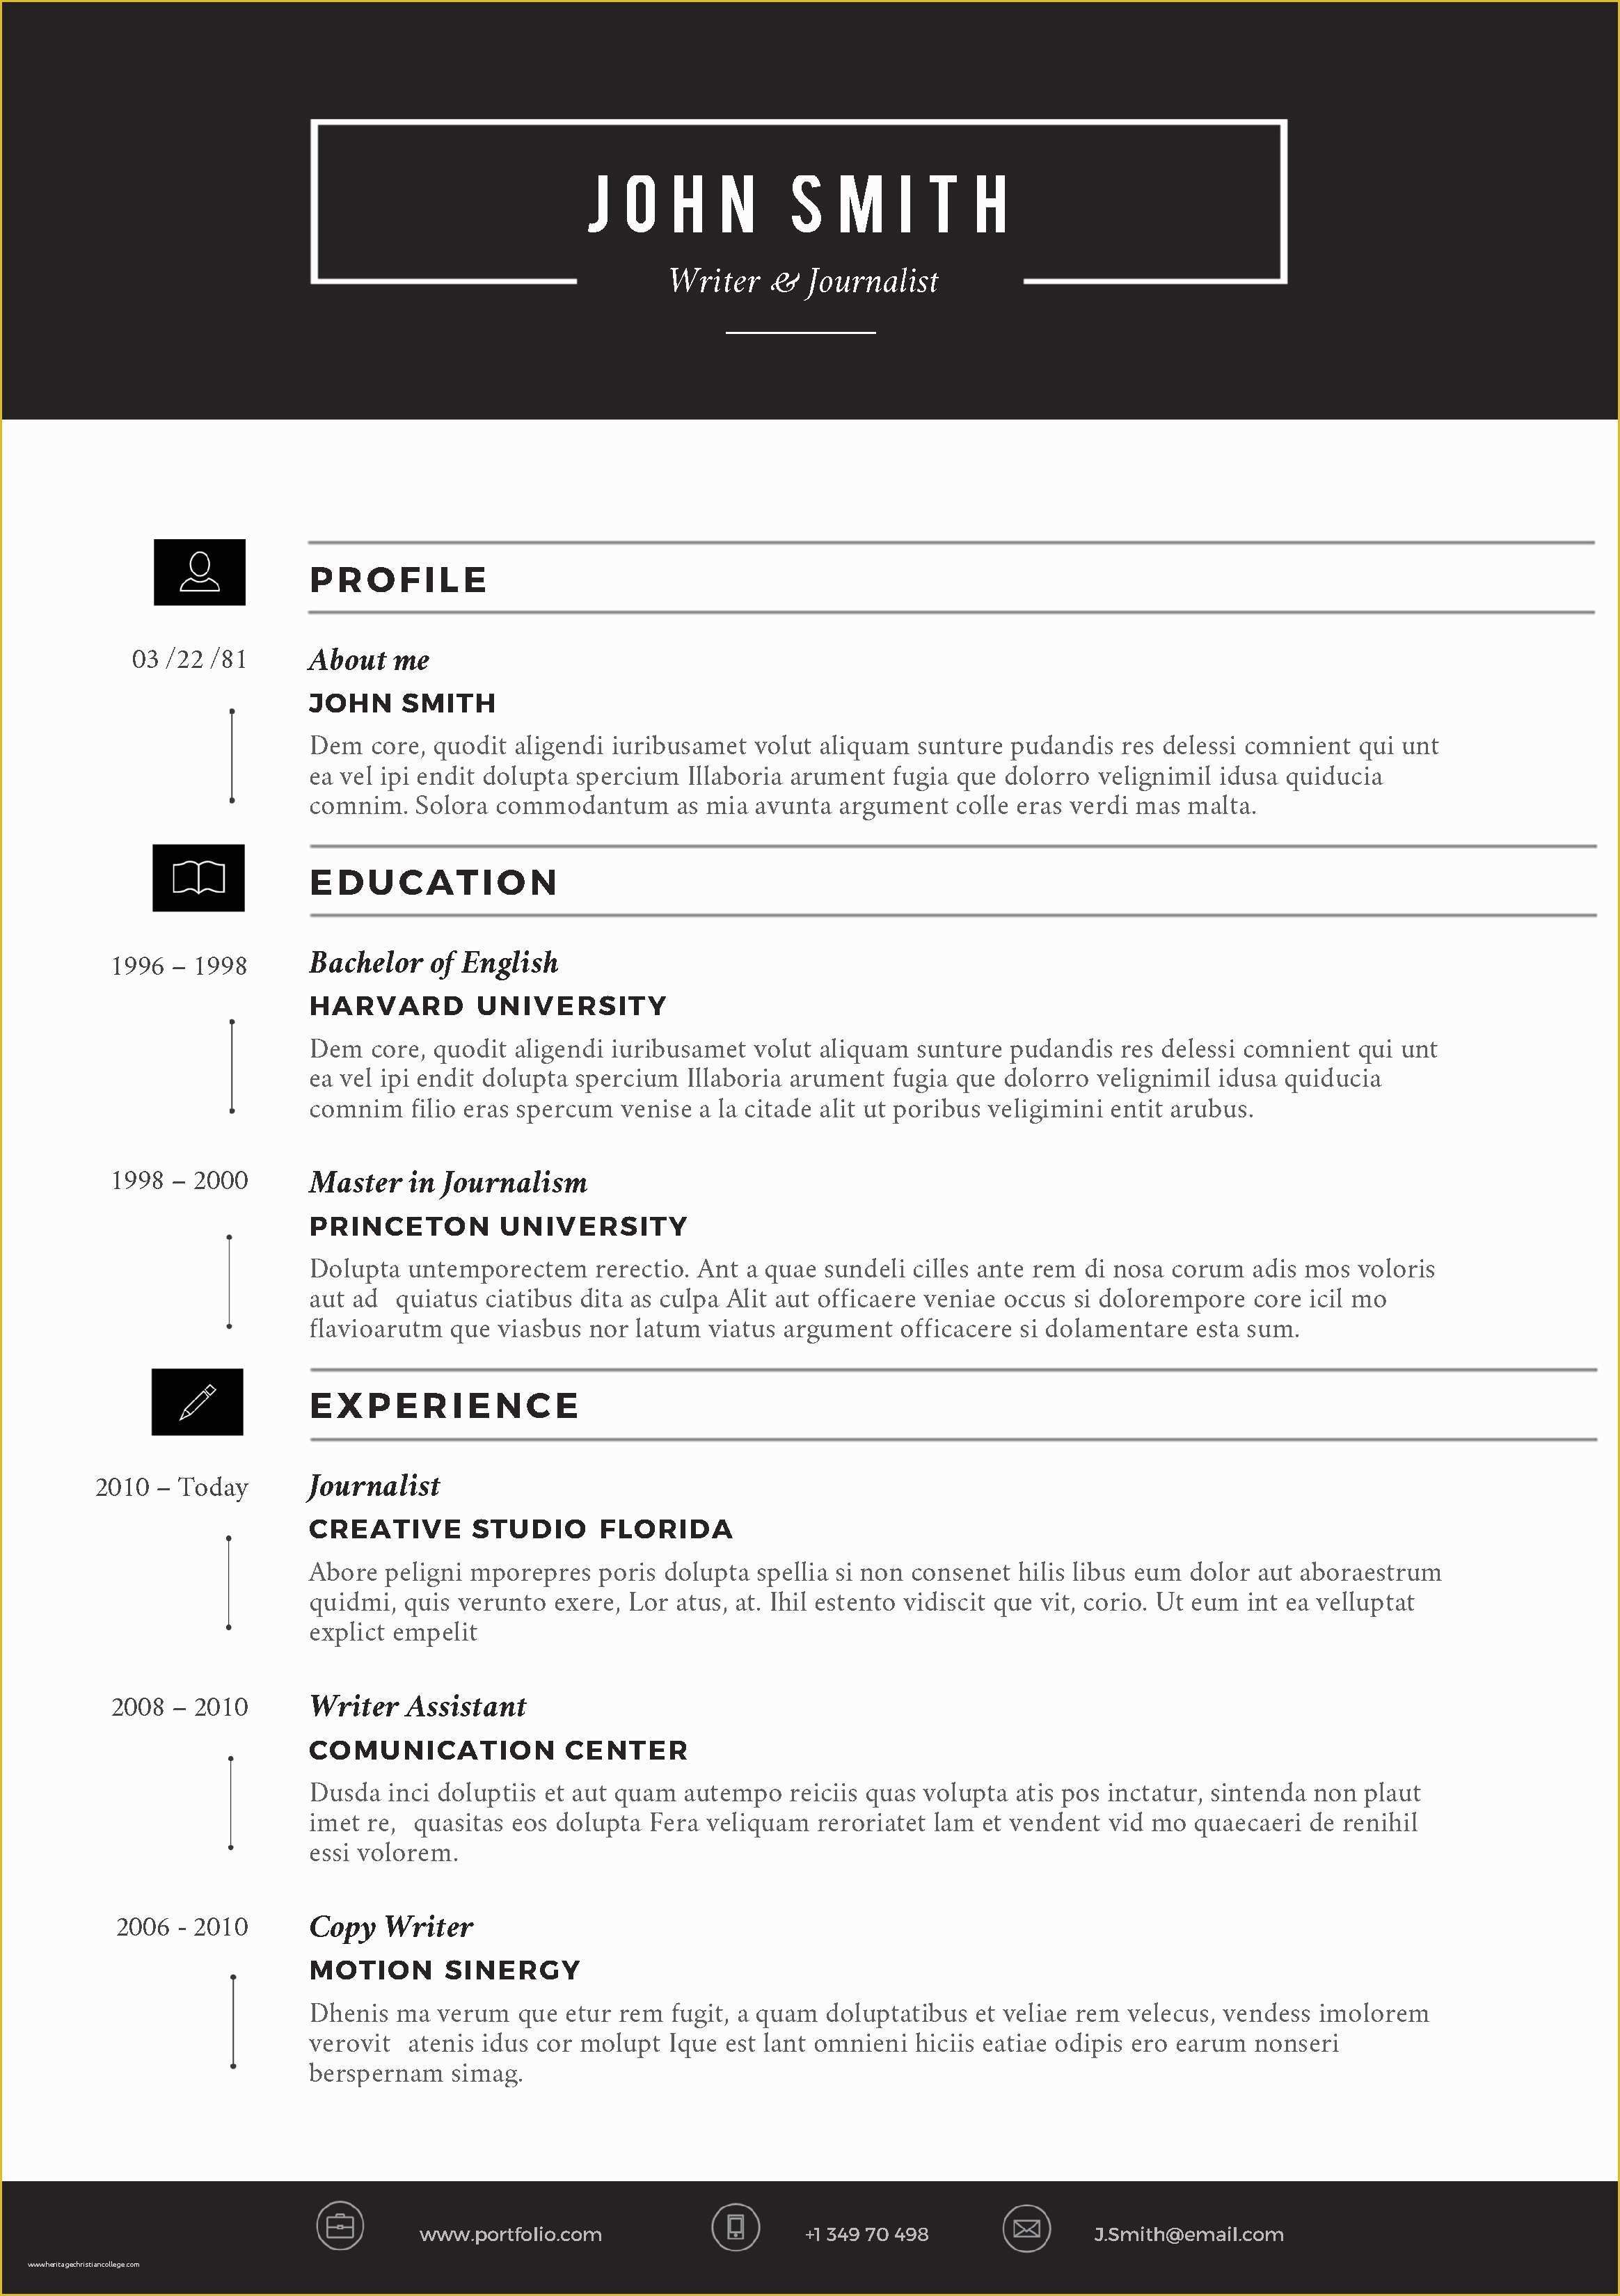 Creative Resume Templates Free Download for Microsoft Word Of Cvfolio ...